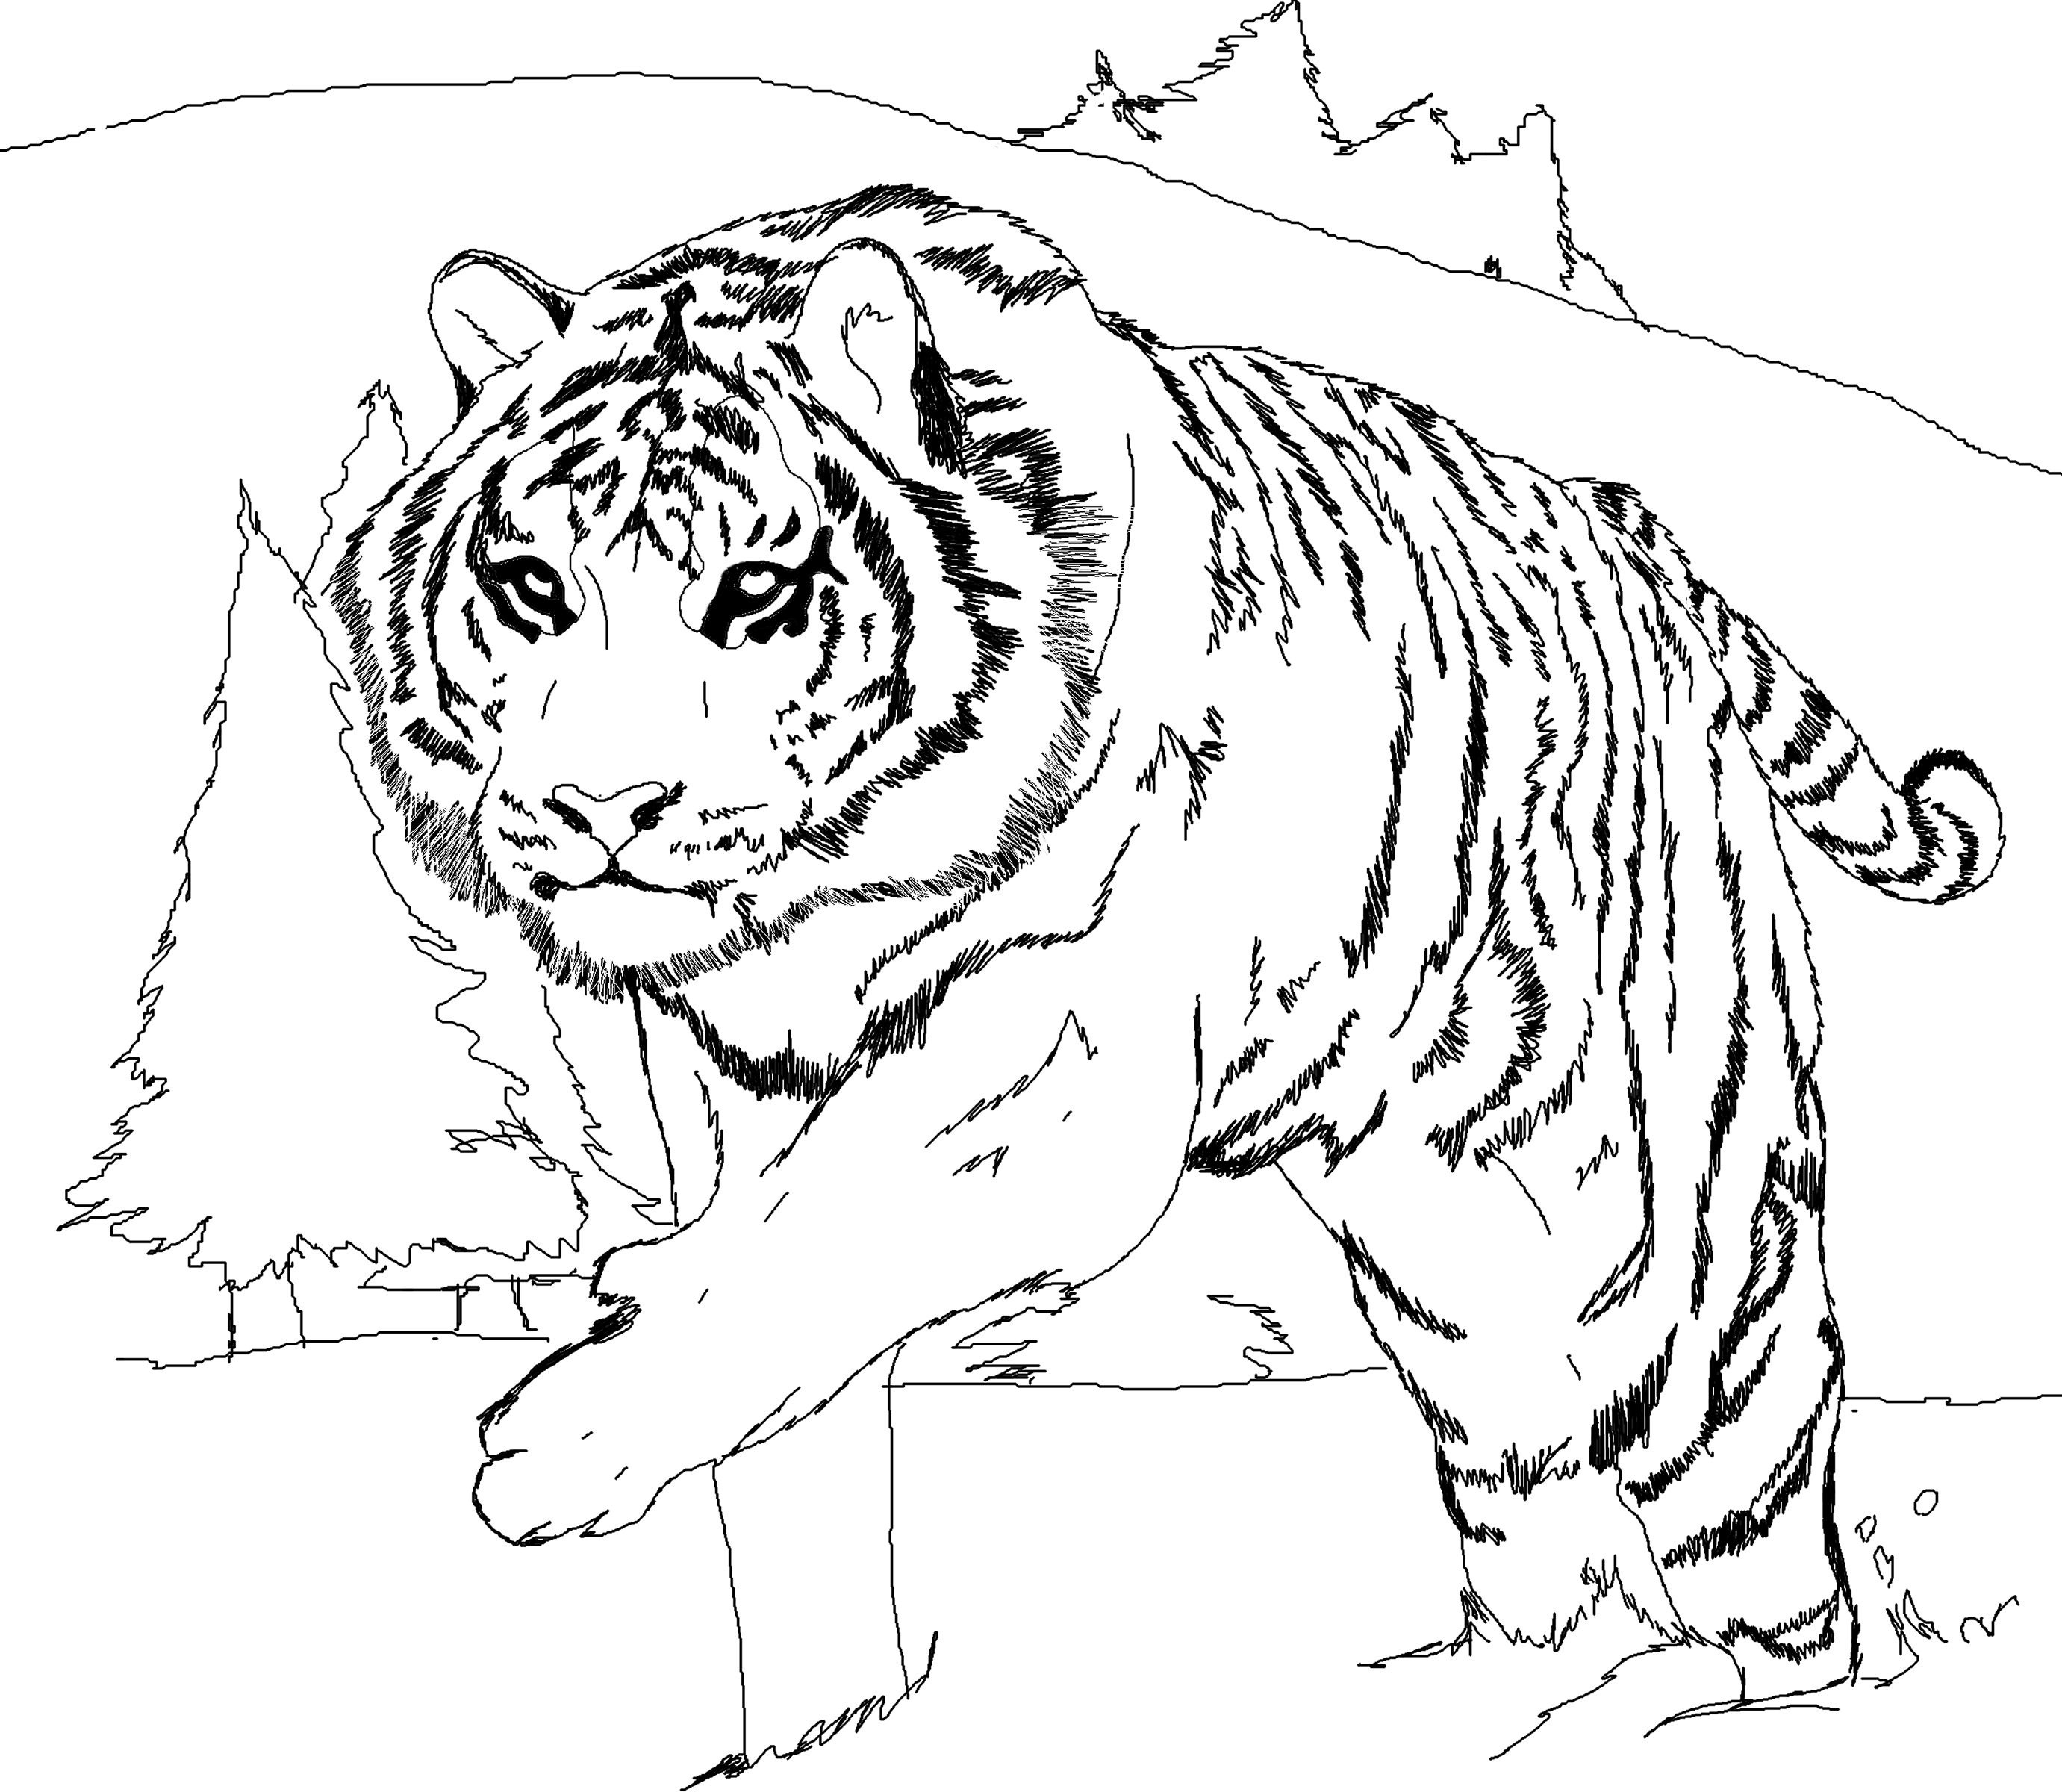  Tiger coloring pages | Animal coloring pages | #16